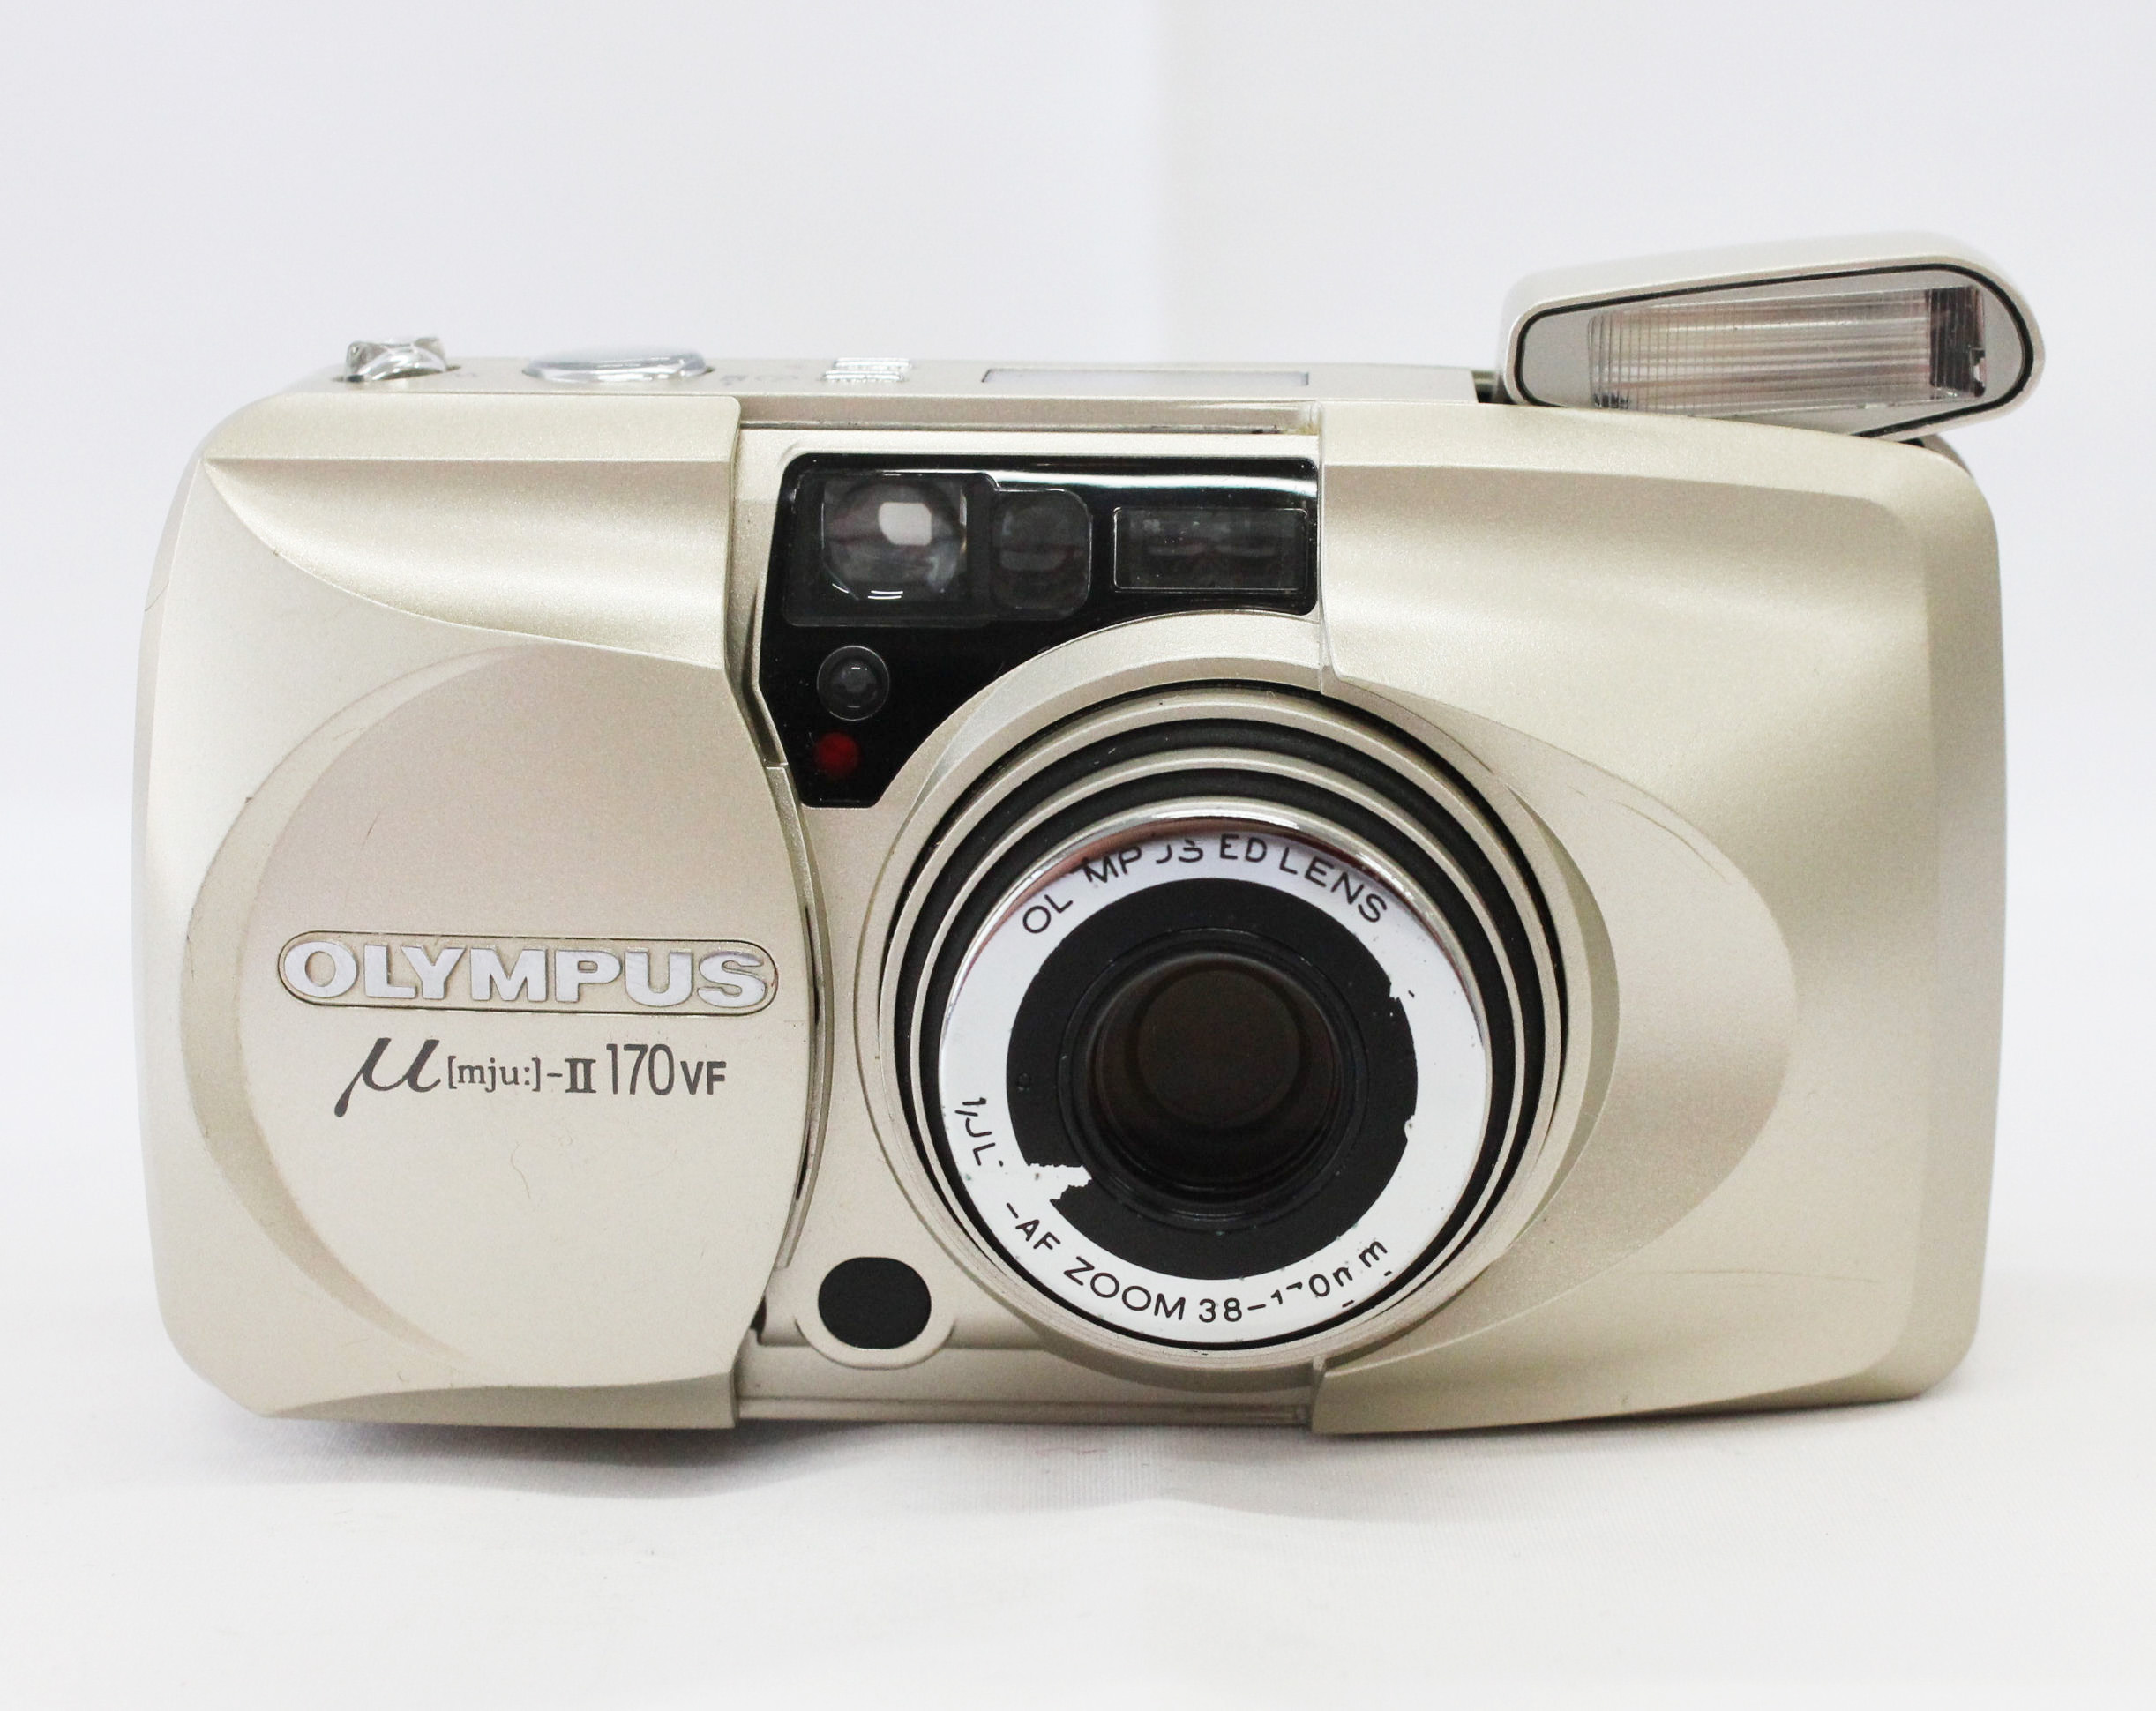  Olympus μ MJU II 170 VF Multi-AF Zoom 35mm Point & Shoot Film Camera with Remote Control RC-300C from Japan Photo 2